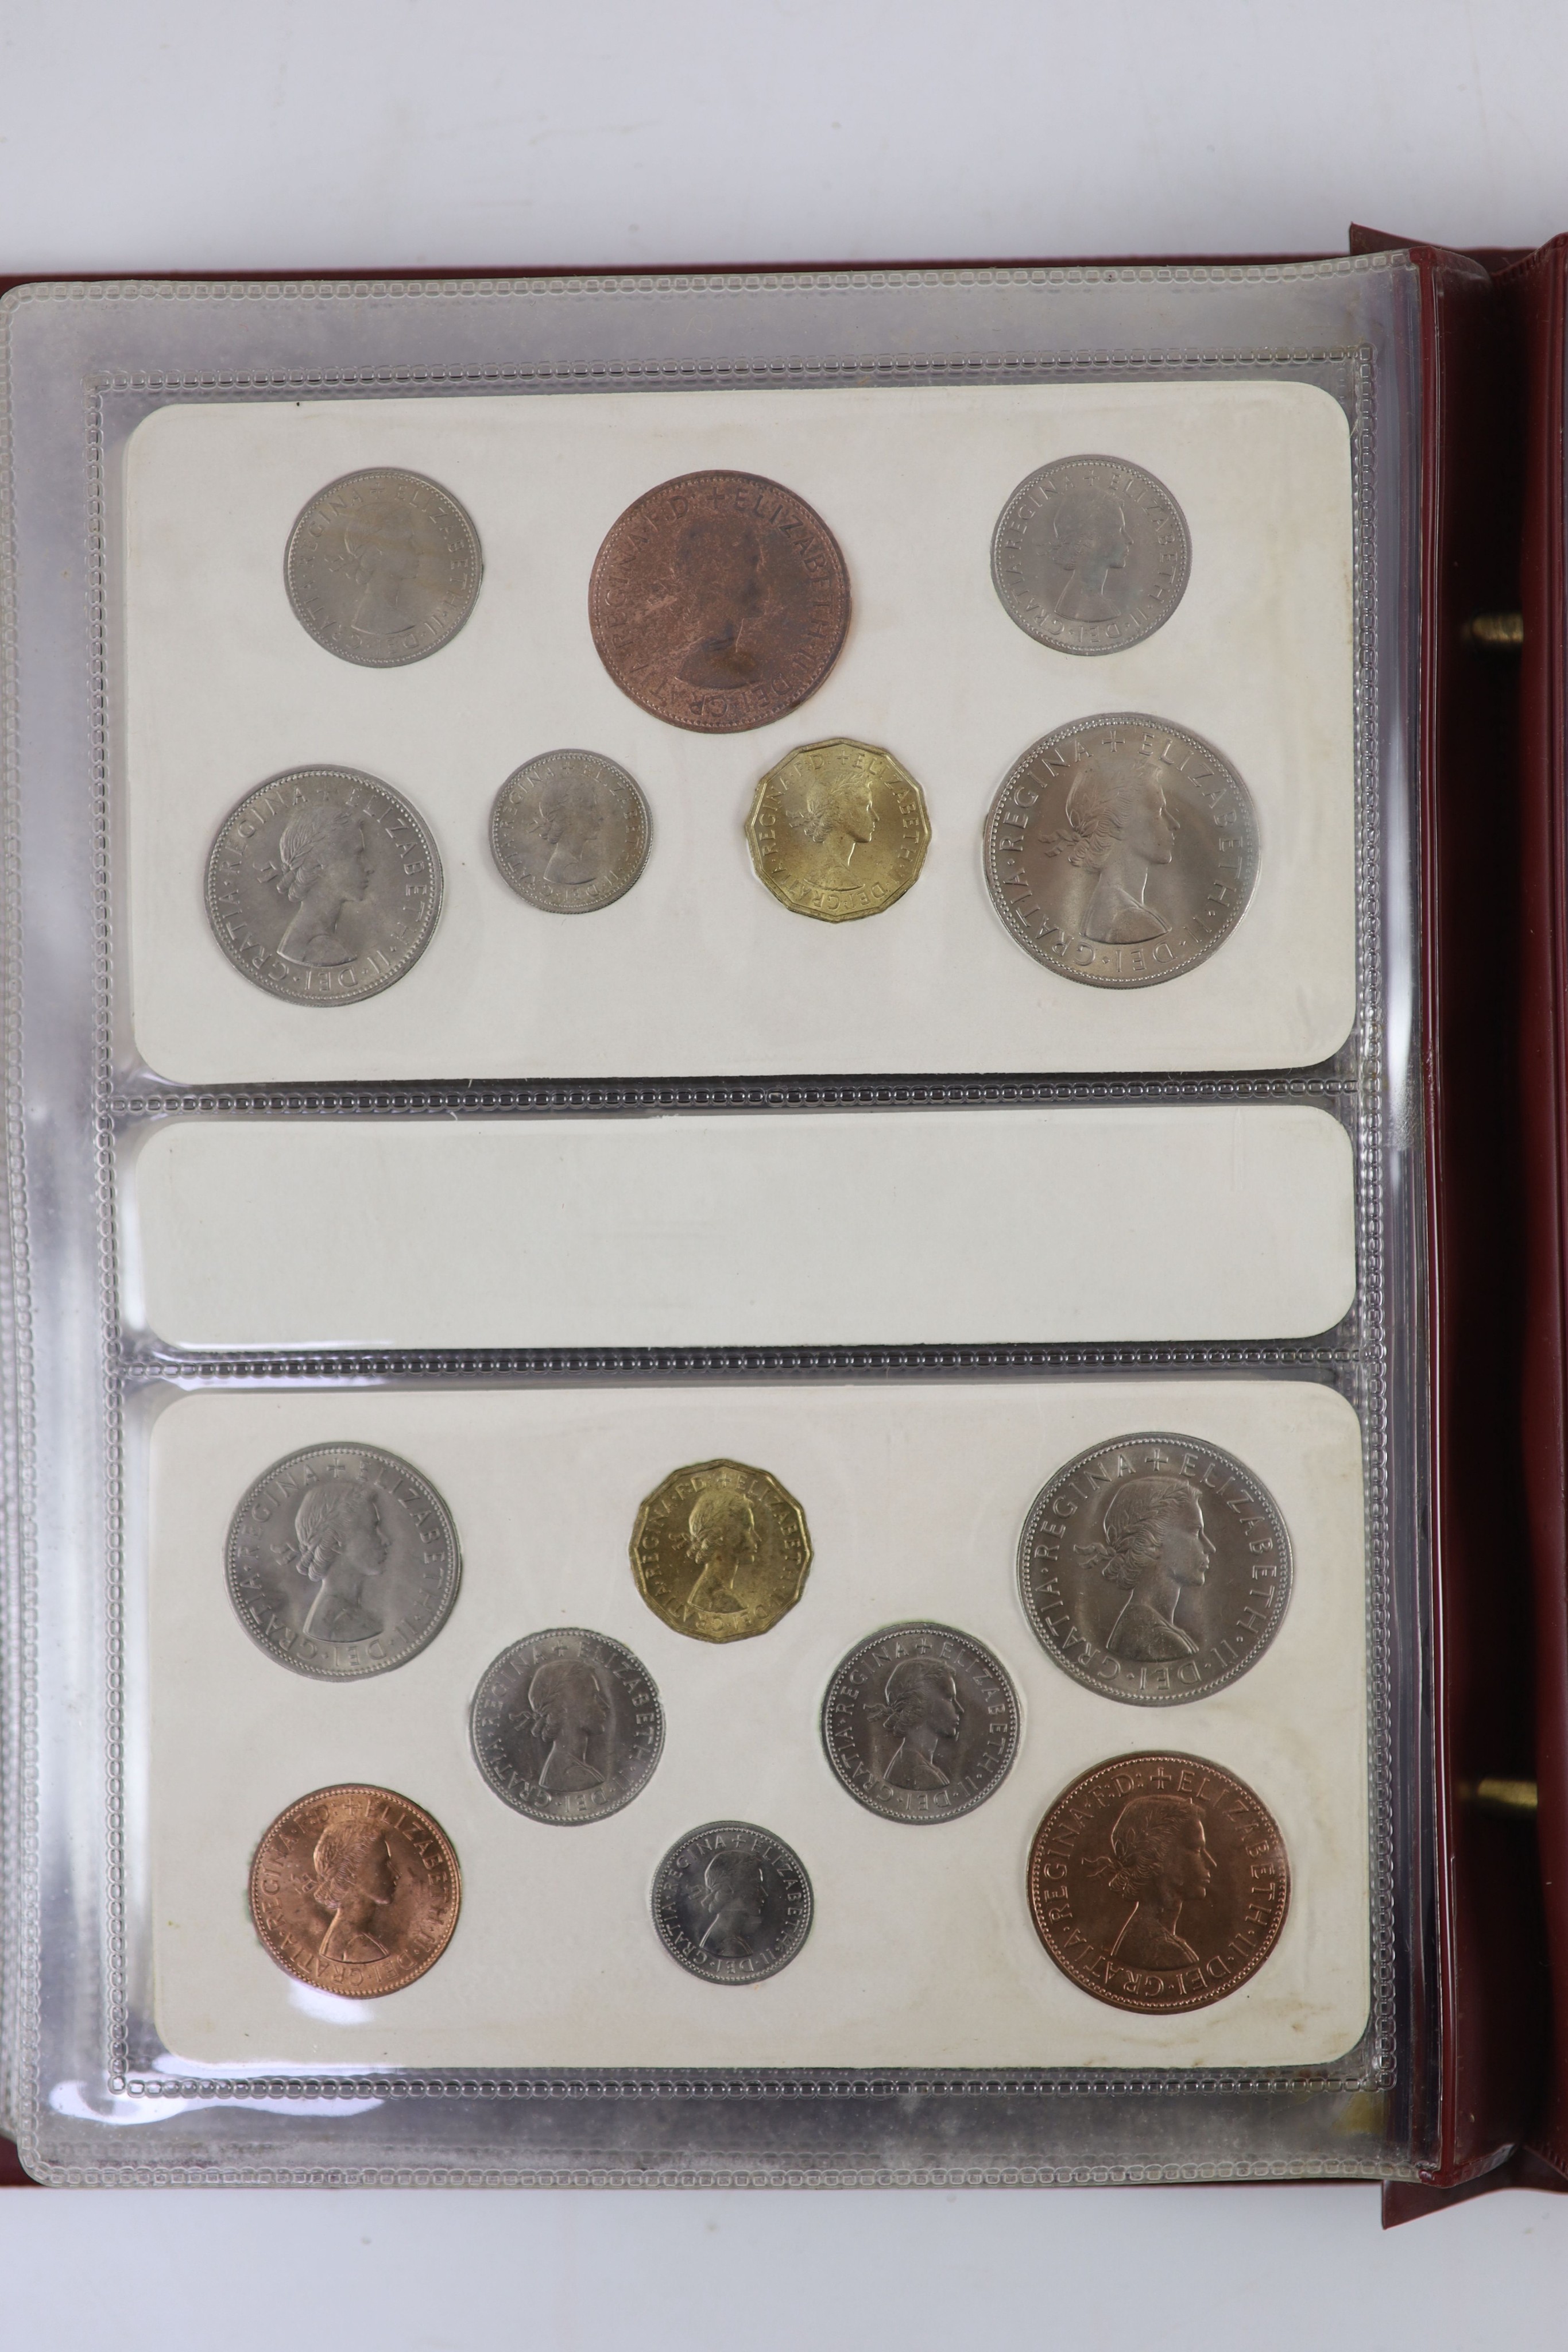 Queen Elizabeth II pre-decimal specimen coin sets for 1953 - 1967, first and second issues, all EF/ - Image 17 of 34